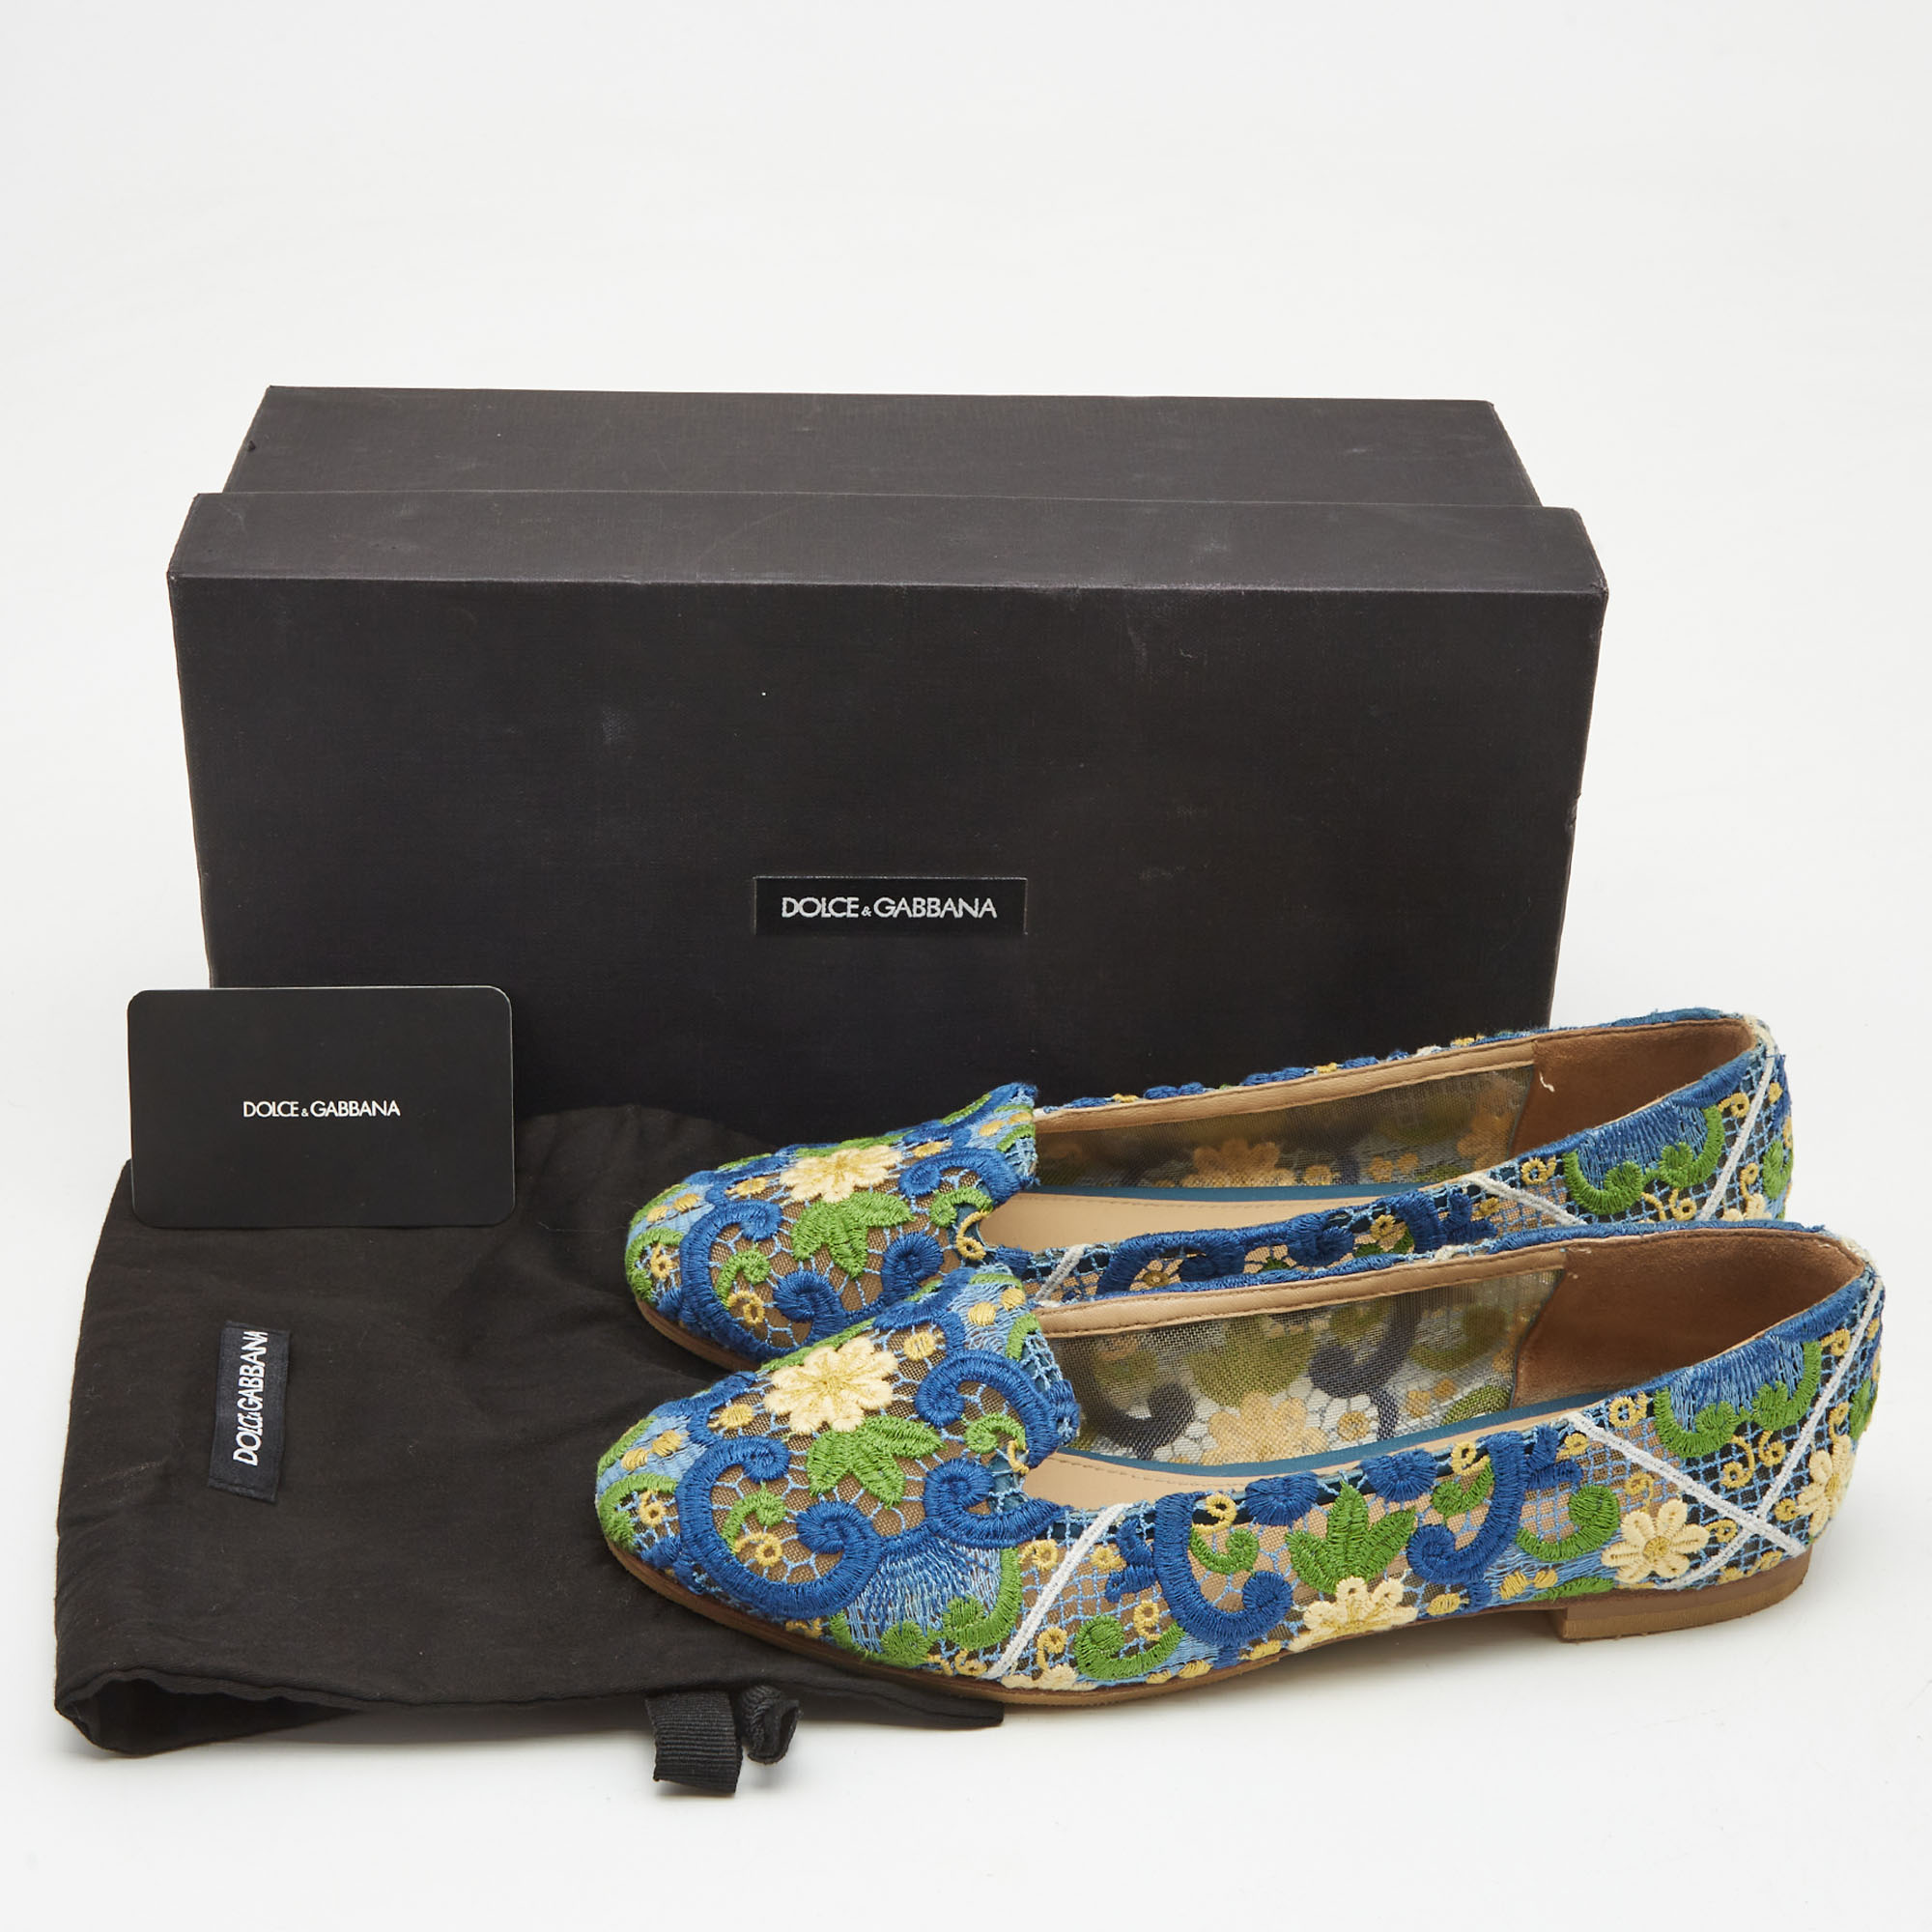 Dolce & Gabbana Tricolor Floral Lace Smoking Slippers Size 37